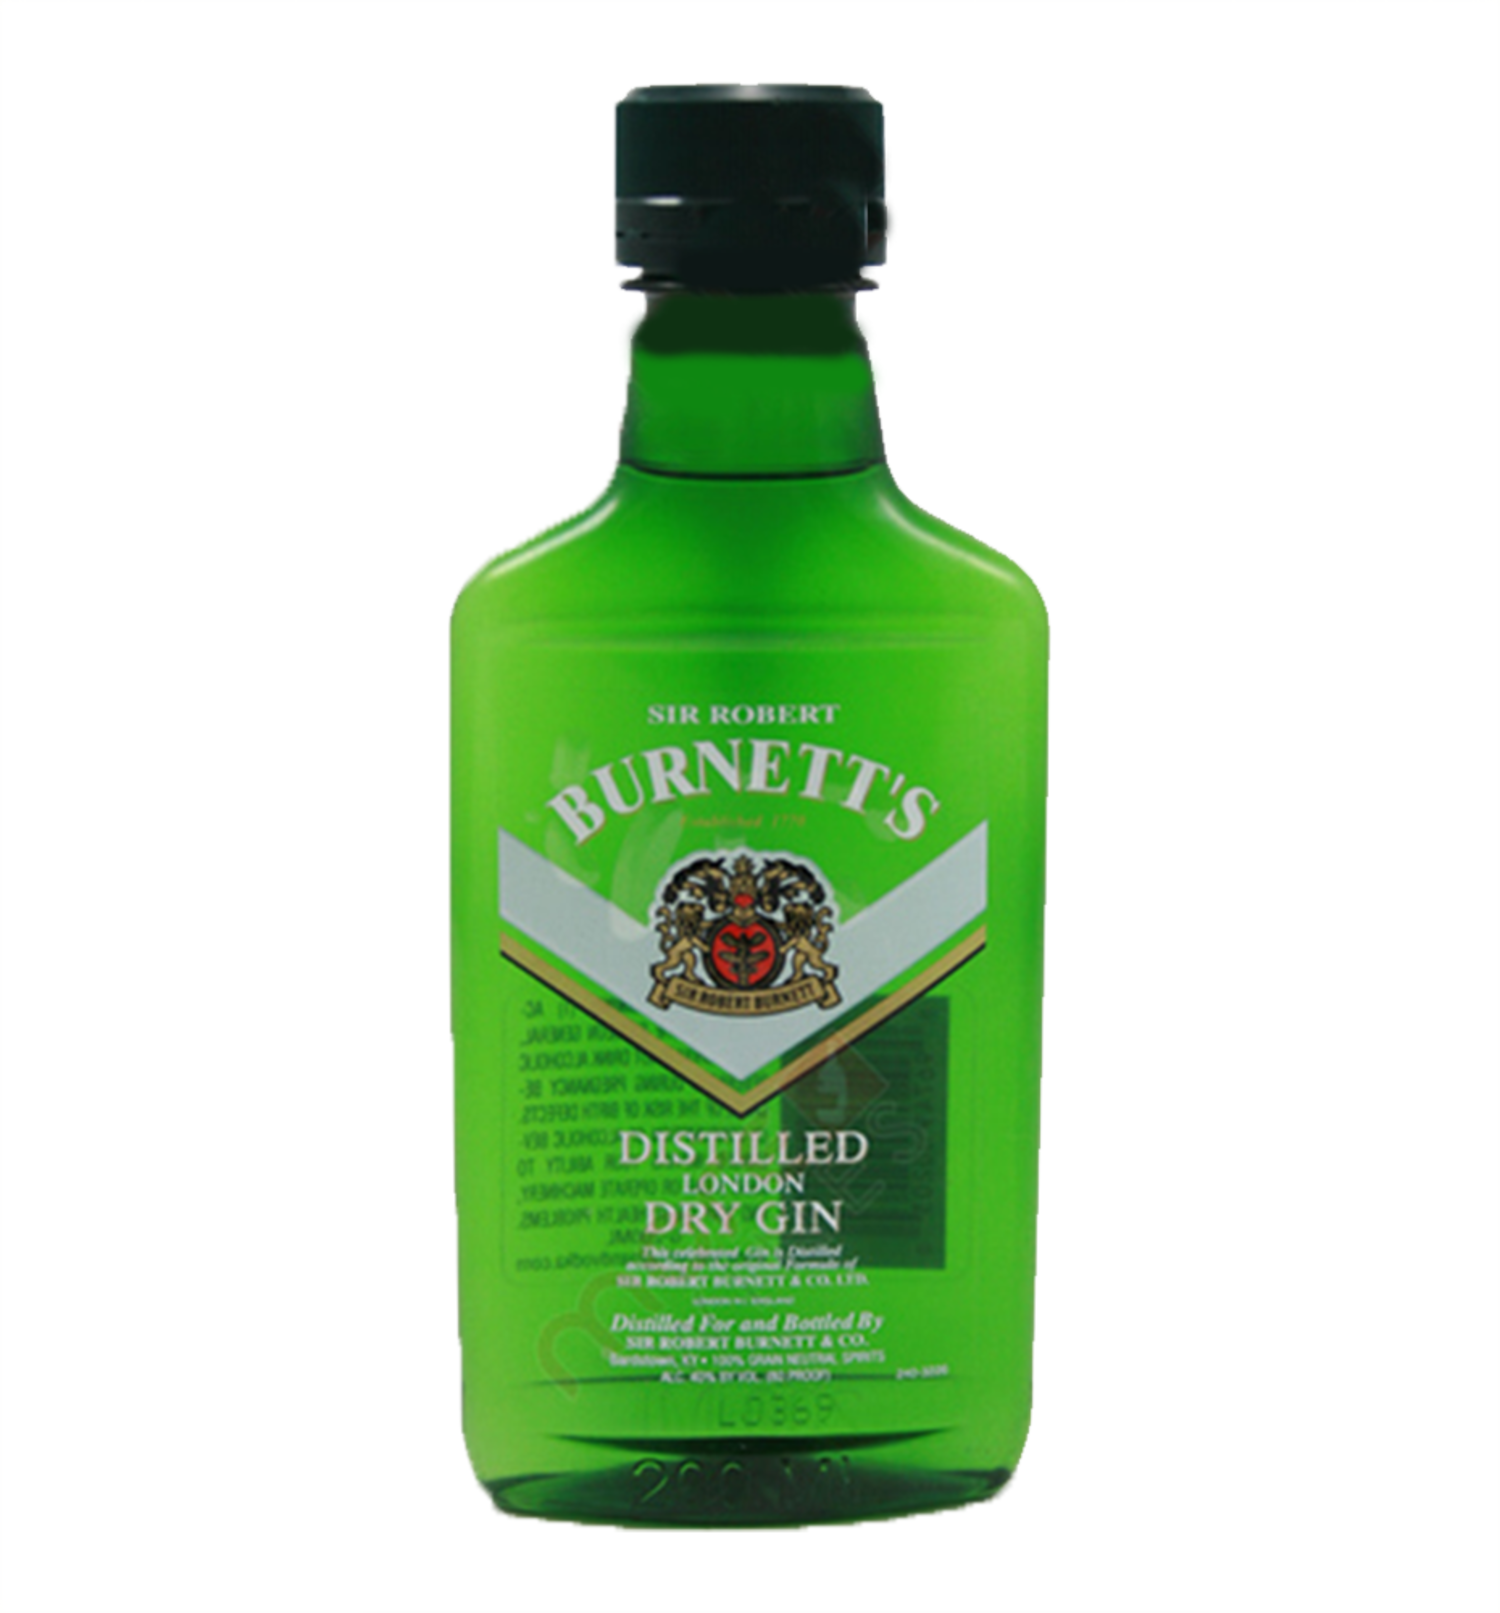 burnett-s-distilled-gin-200ml-3-free-delivery-uncle-fossil-wine-spirits